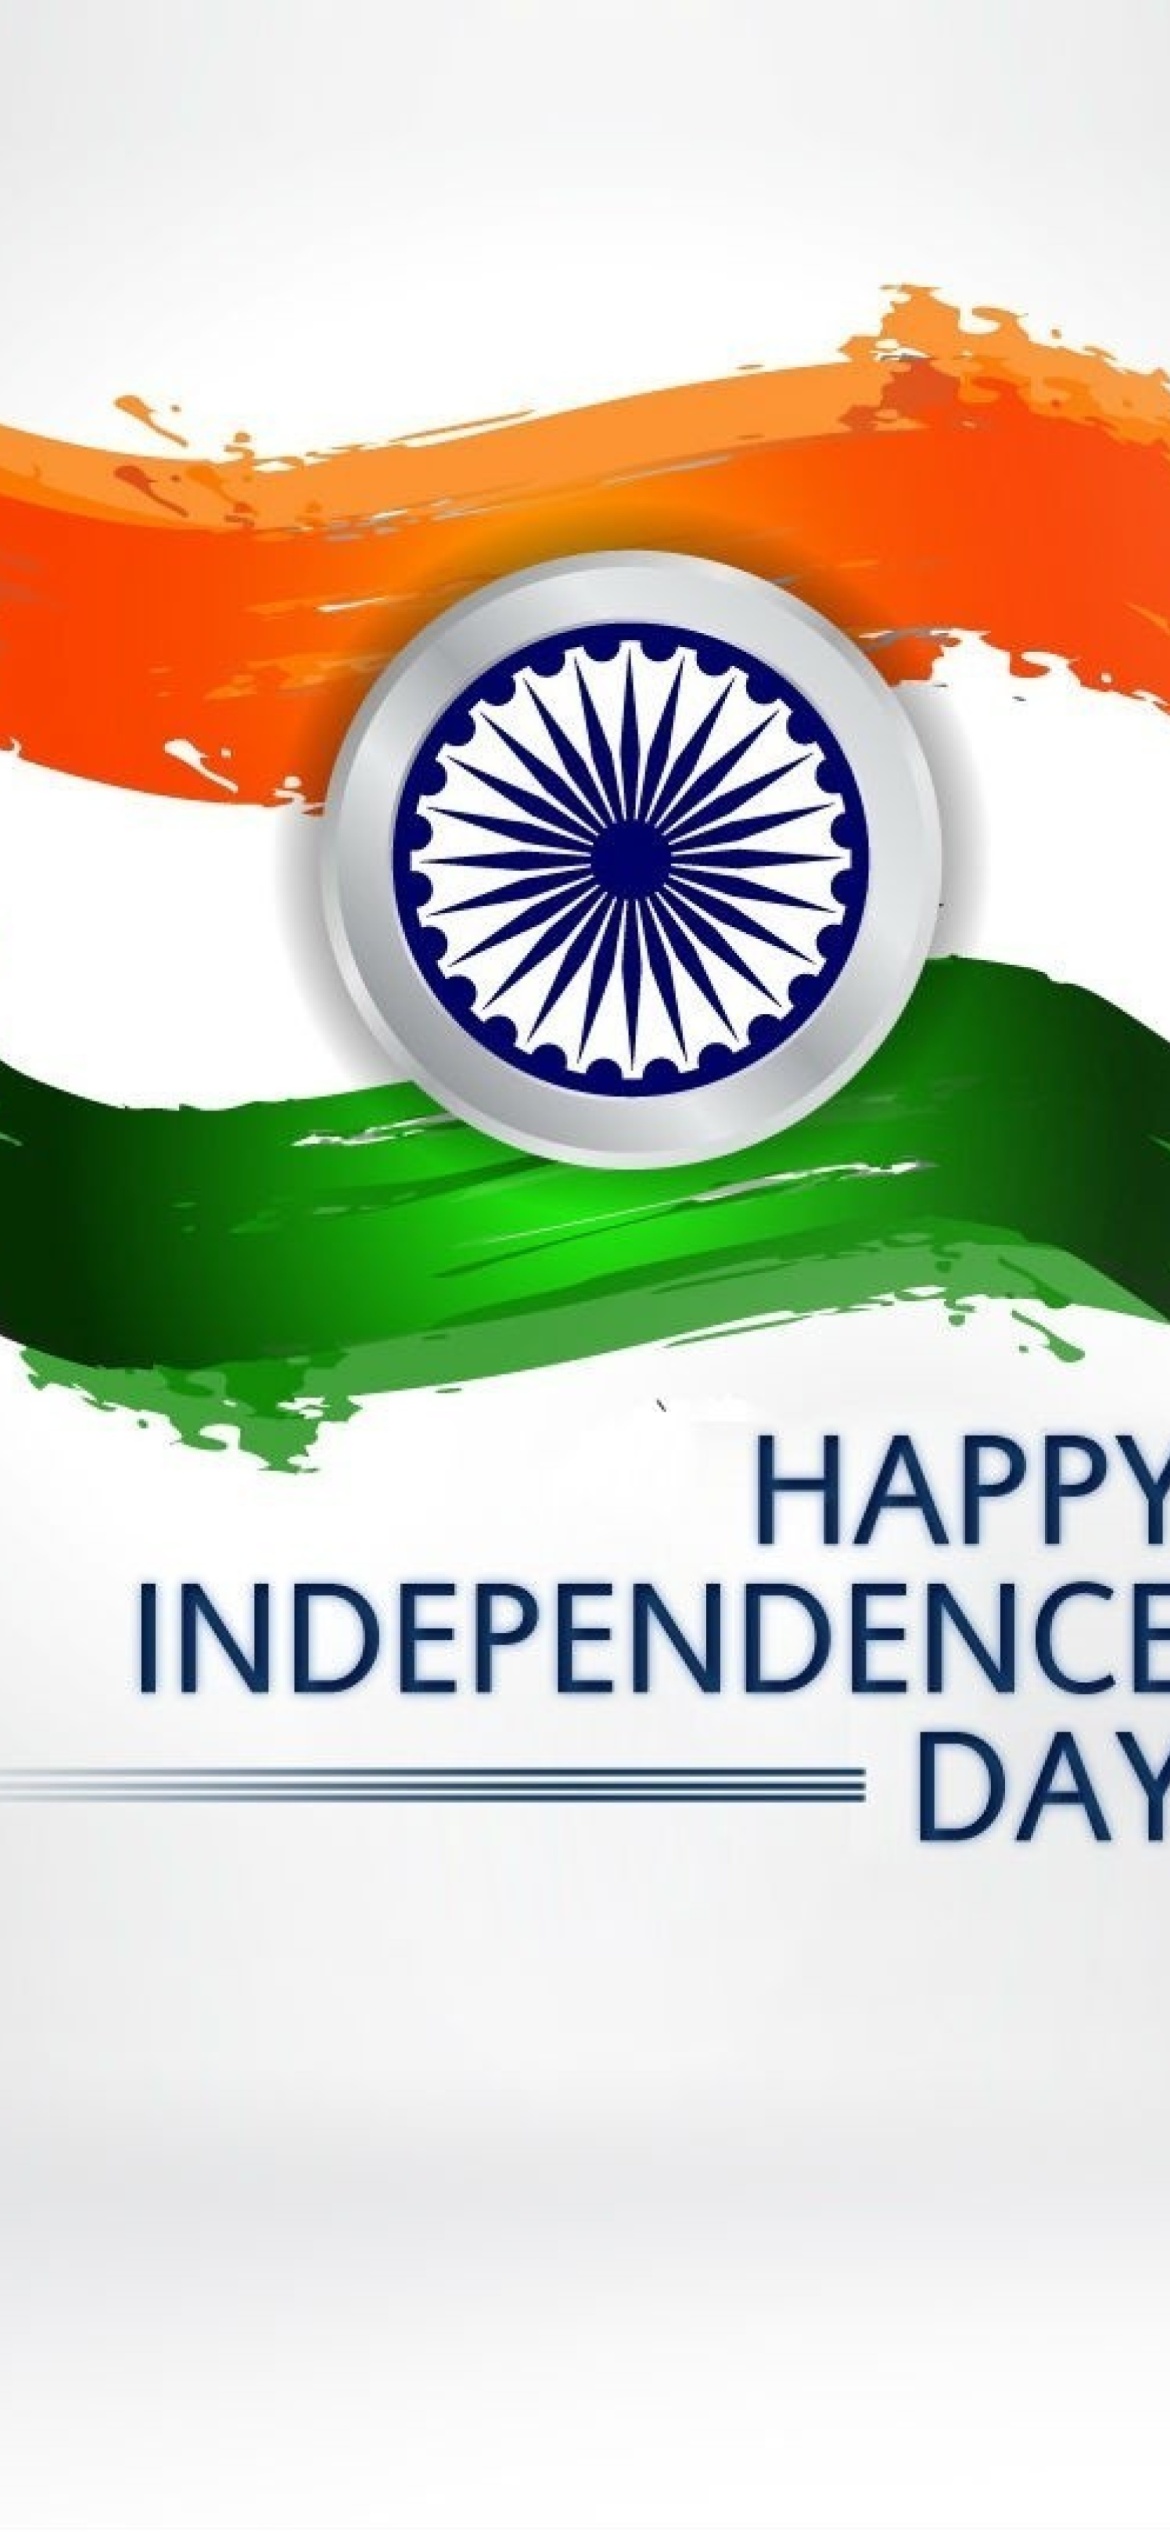 Das Independence Day India Wallpaper 1170x2532